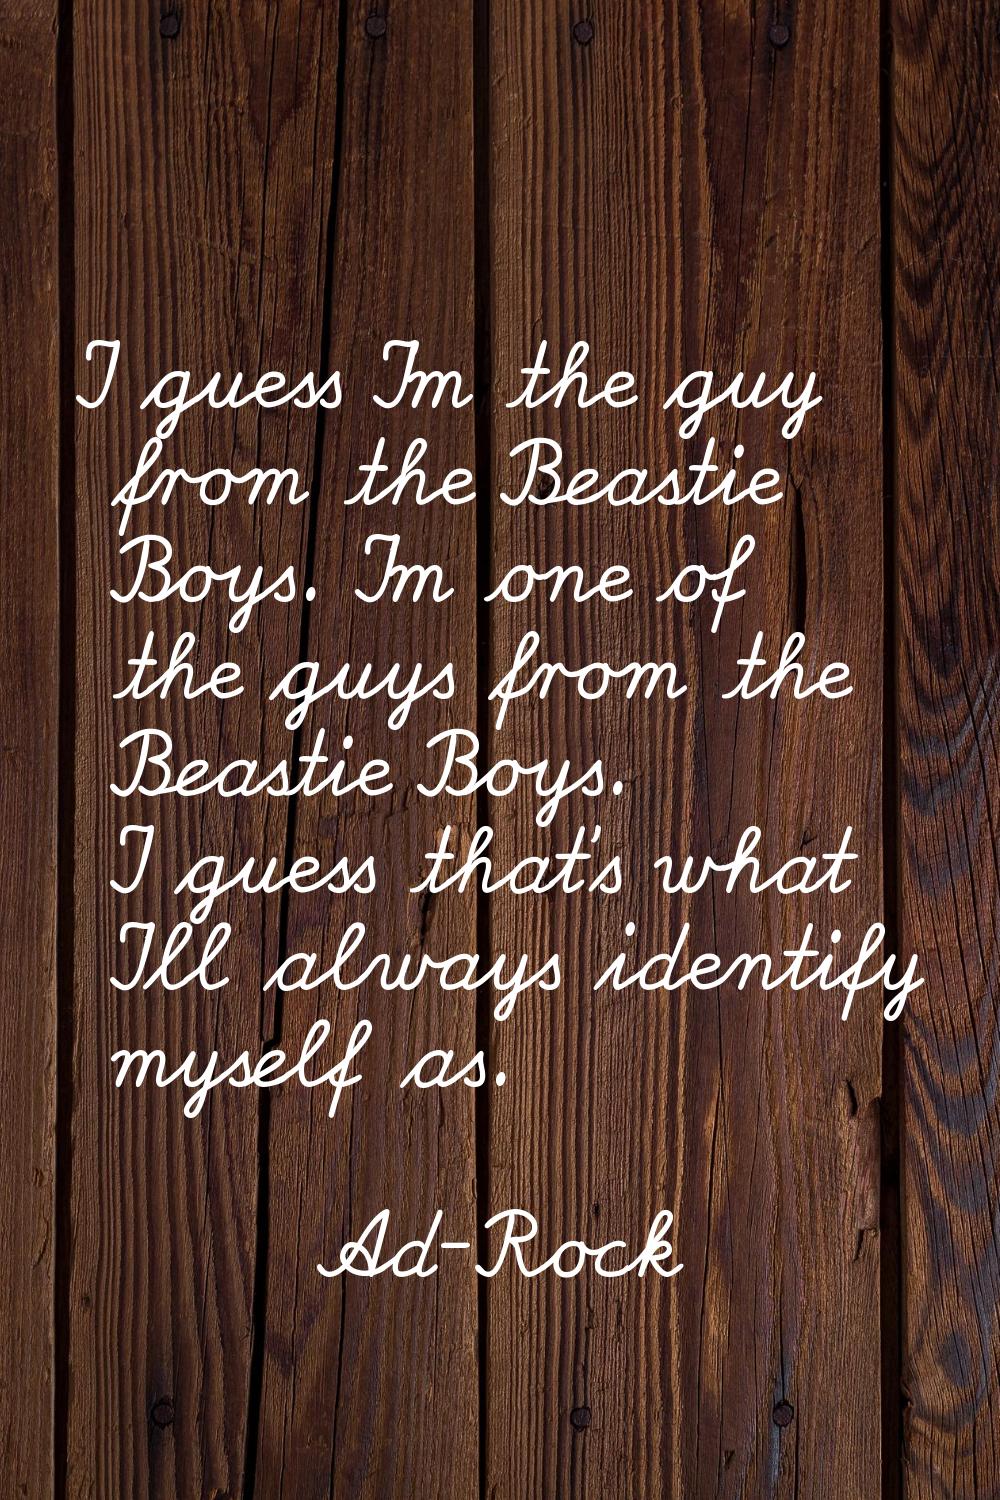 I guess I'm the guy from the Beastie Boys. I'm one of the guys from the Beastie Boys. I guess that'